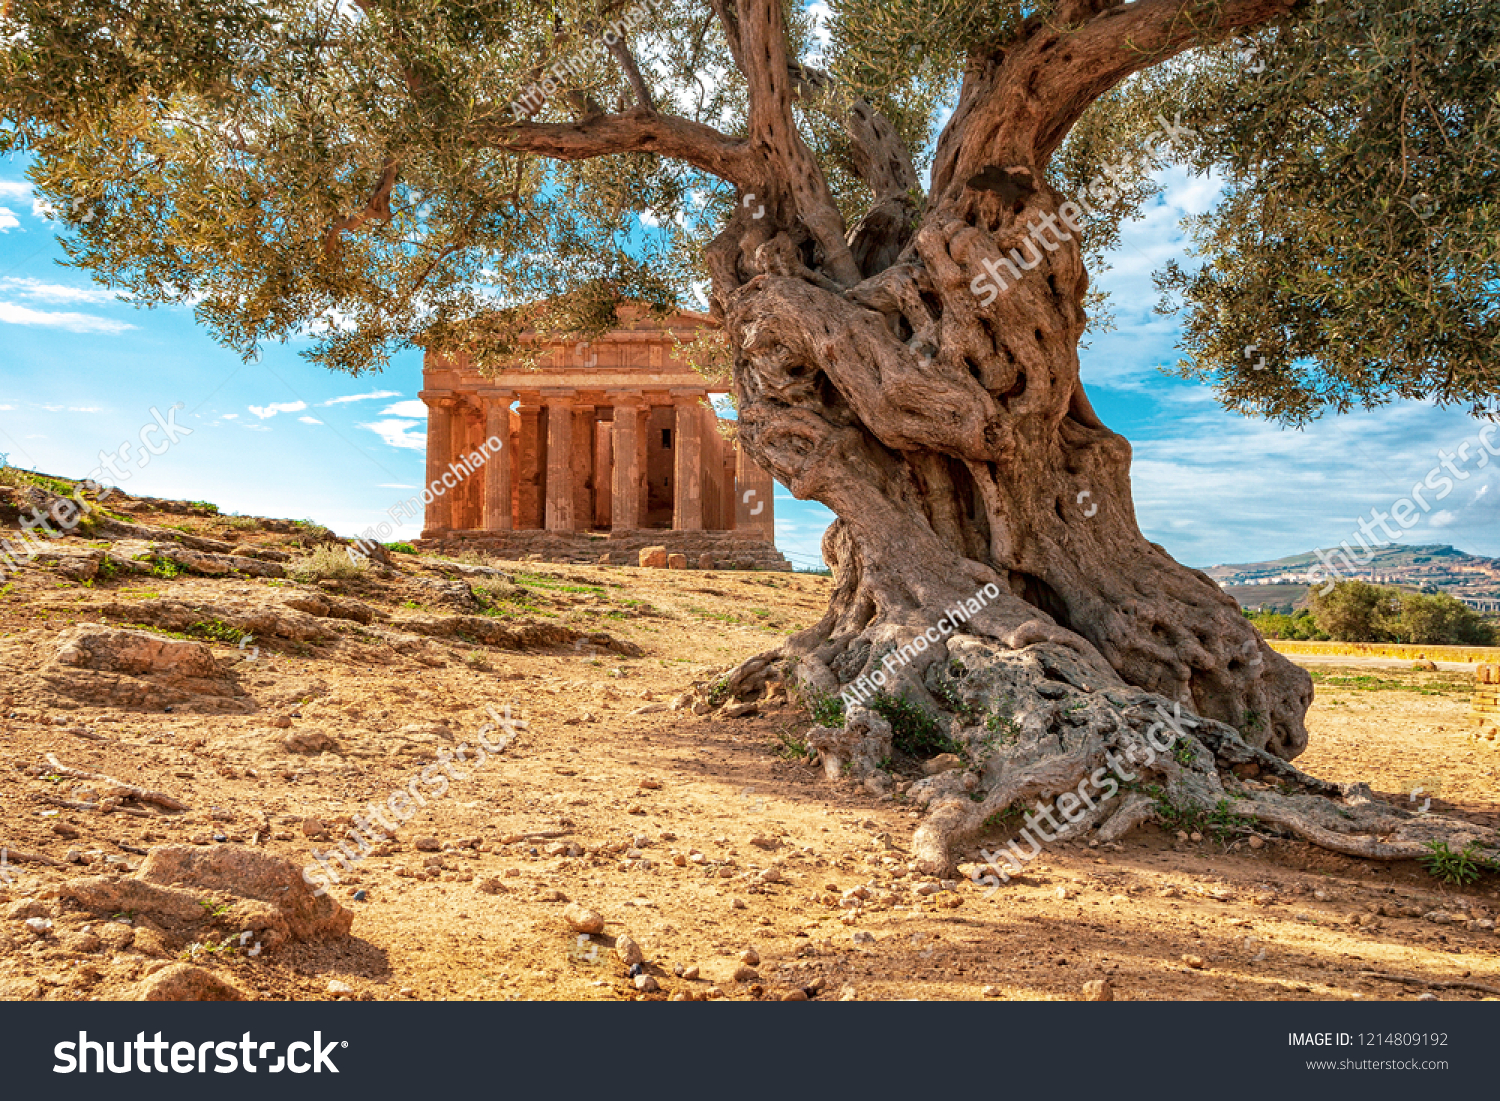 Agrigento - Temples valley
A greek temple in Sicily with an olive tree in the foreground #1214809192